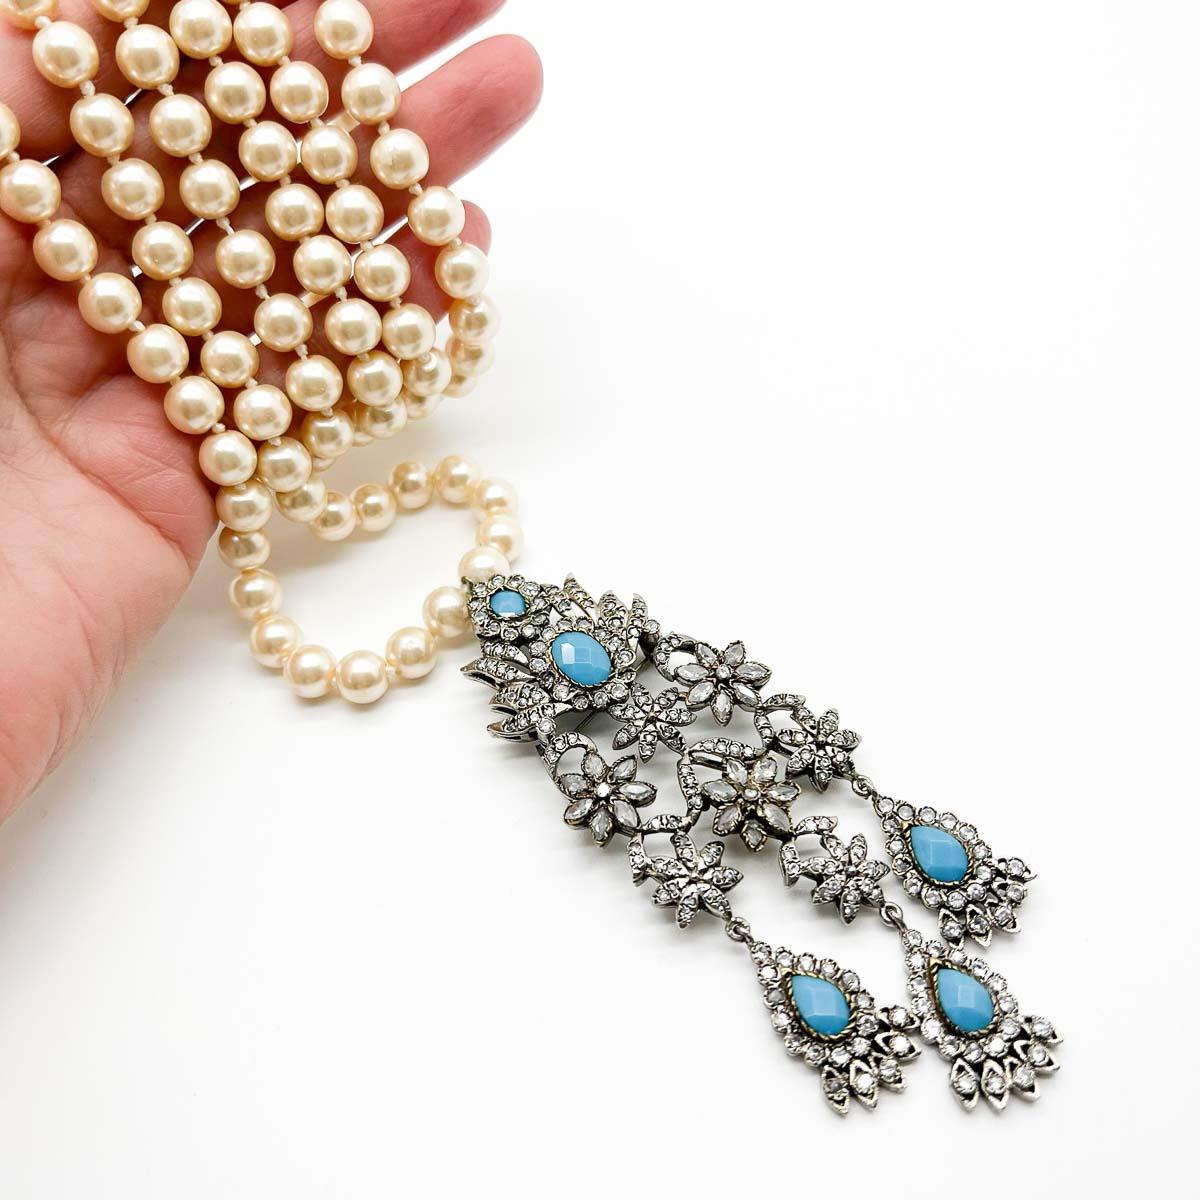 A magnificent Vintage Georgian Style Paste Necklace with turquoise and pearls. A long and elaborate Georgian style pendant is set with paste and faceted turquoise glass. The pendant can also be pinned in position either to avoid swinging or to